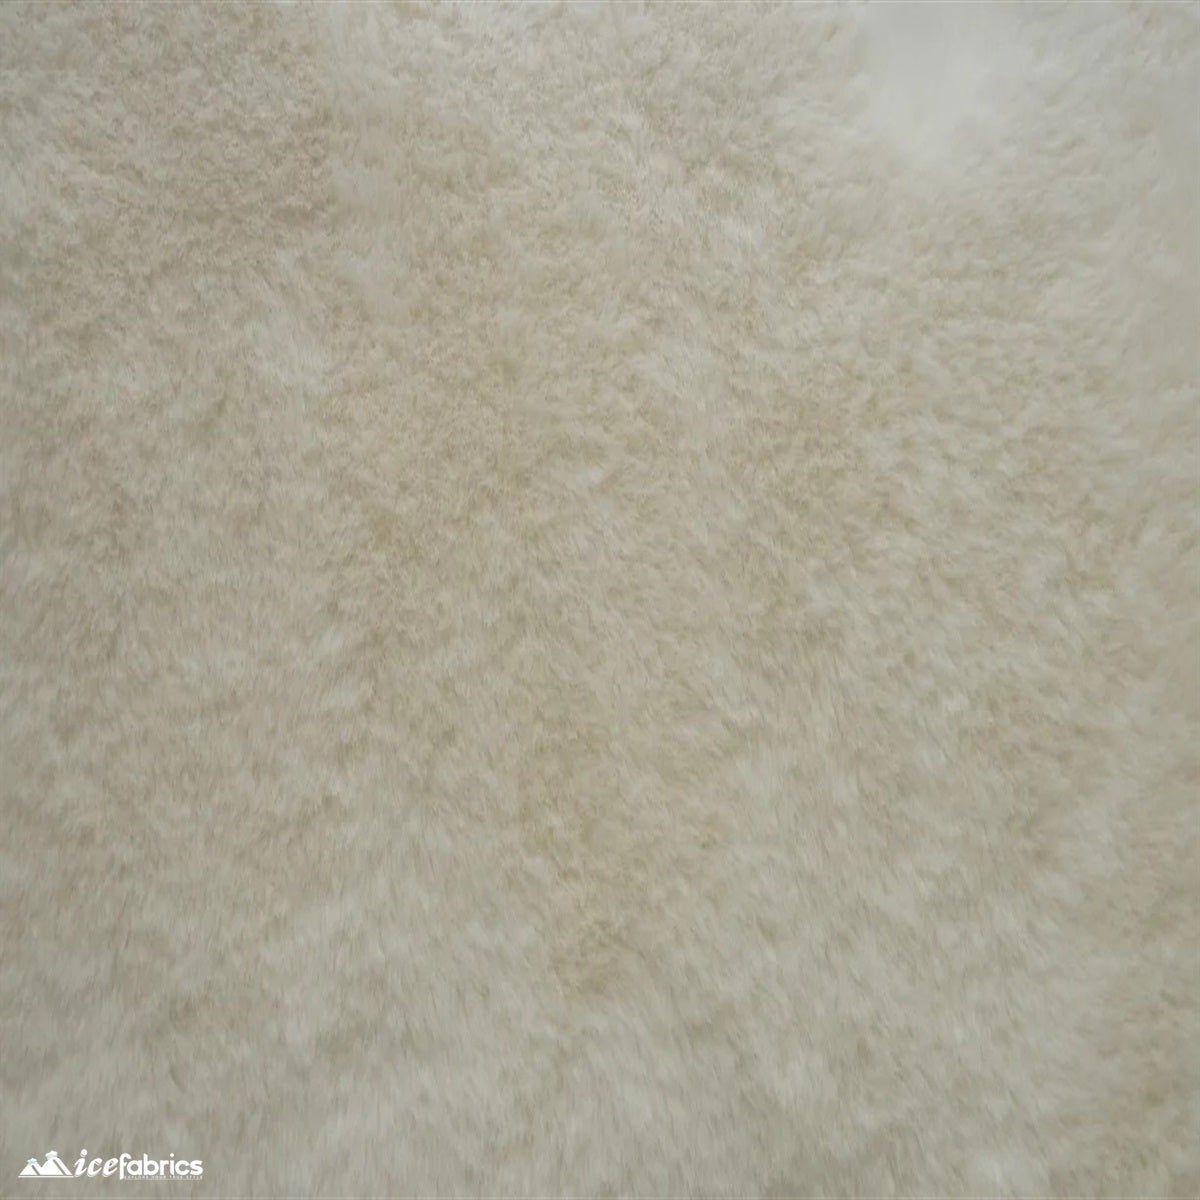 Buy Soft Short Pile Bunny Thick Faux Fur Minky Fabric